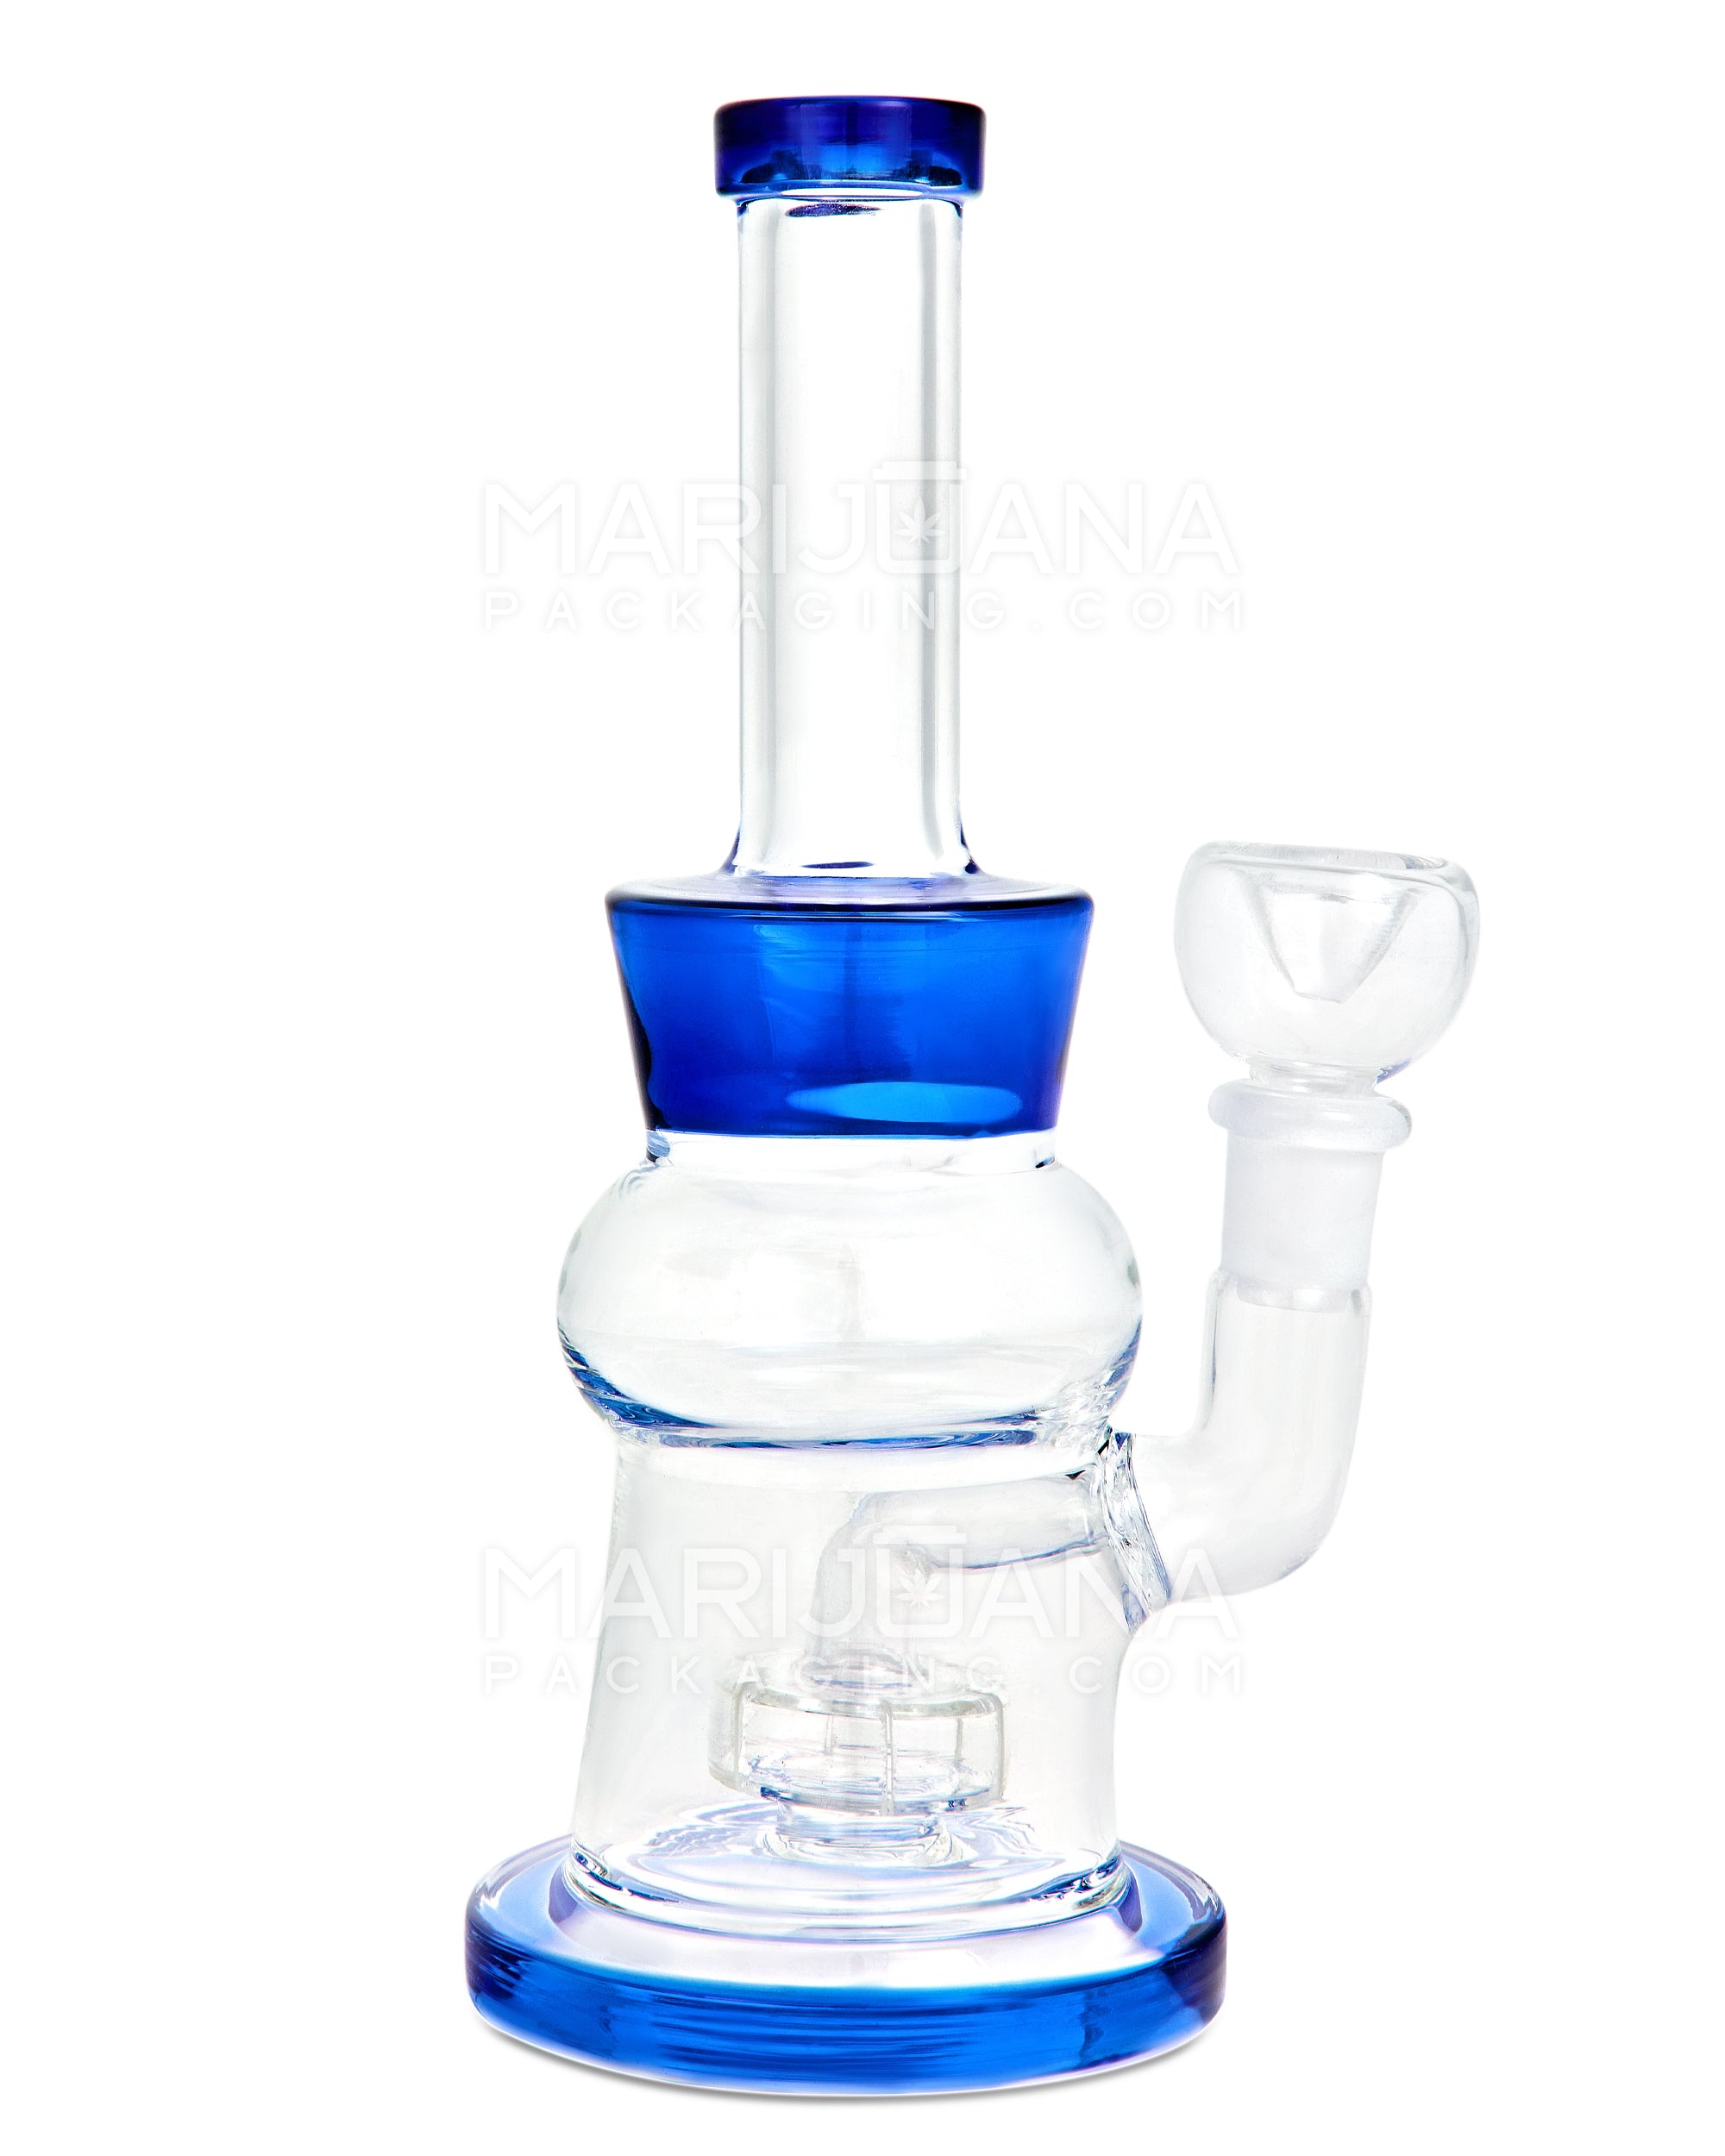 Straight Neck Showerhead Perc Glass Blunted Cone Water Pipe w/ Thick Base | 8in Tall - 14mm Bowl - Blue - 1